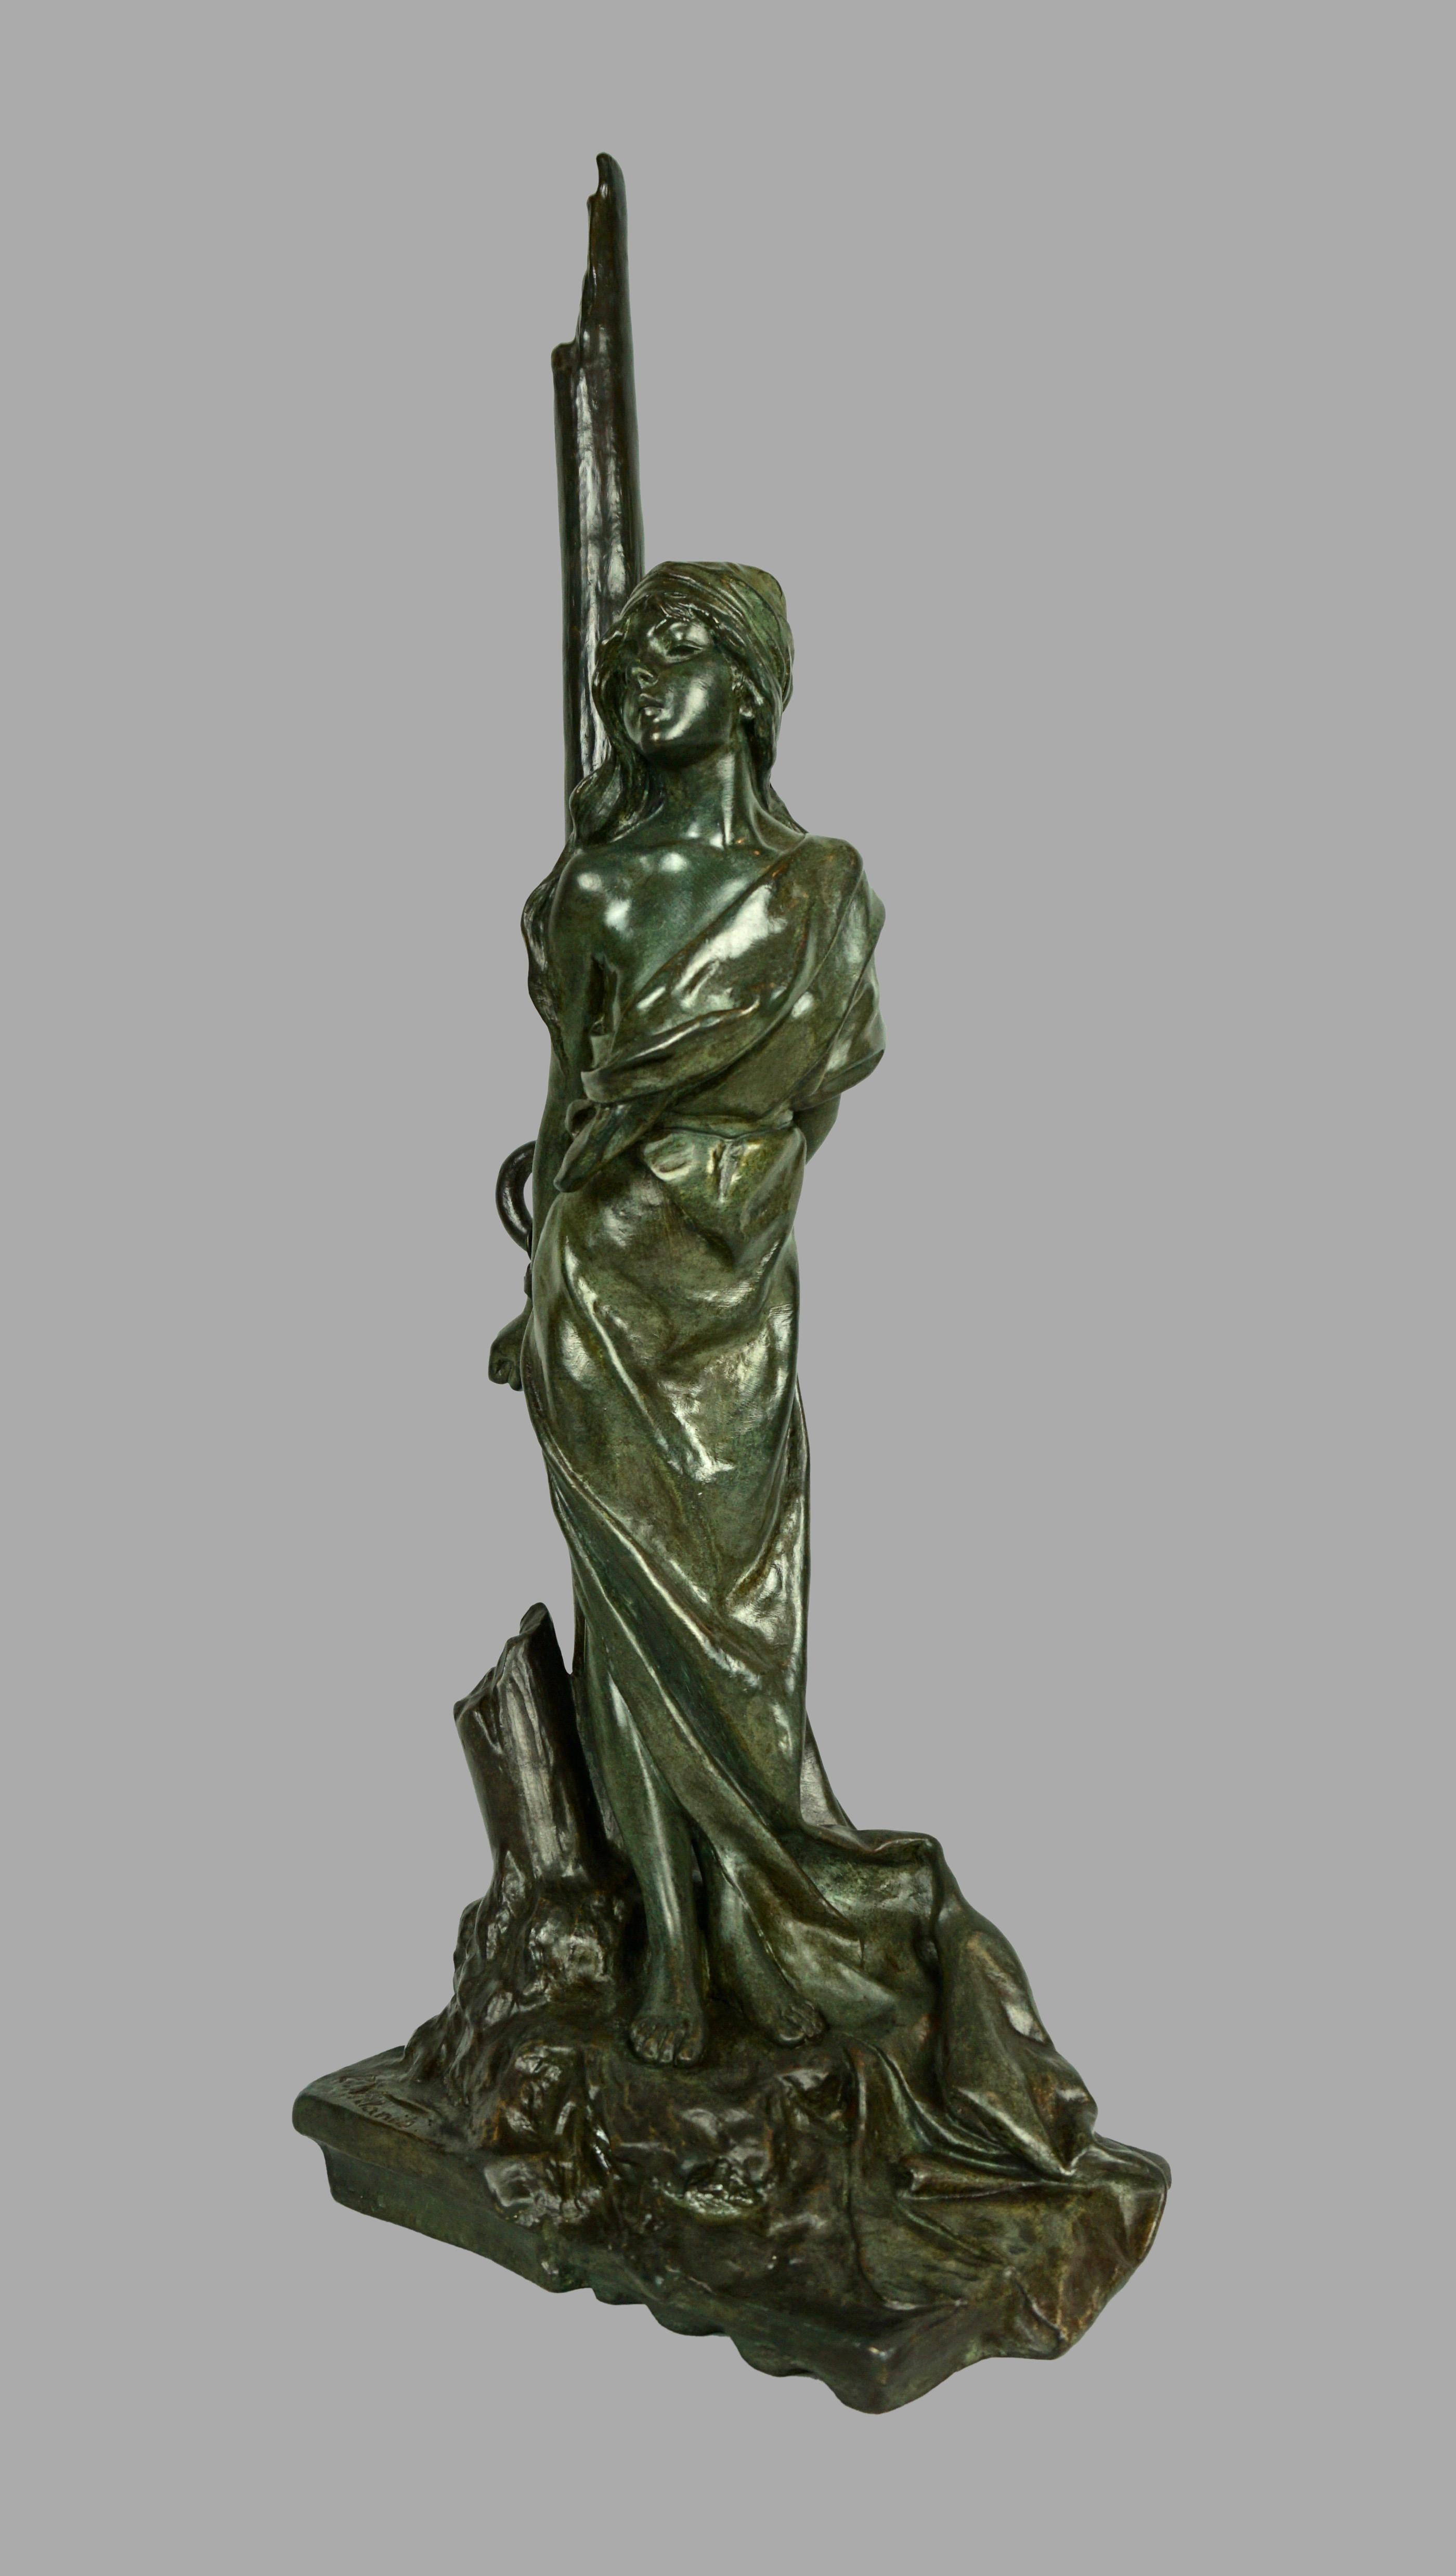 A dramatic bronze model of a woman chained to a stake entitled 